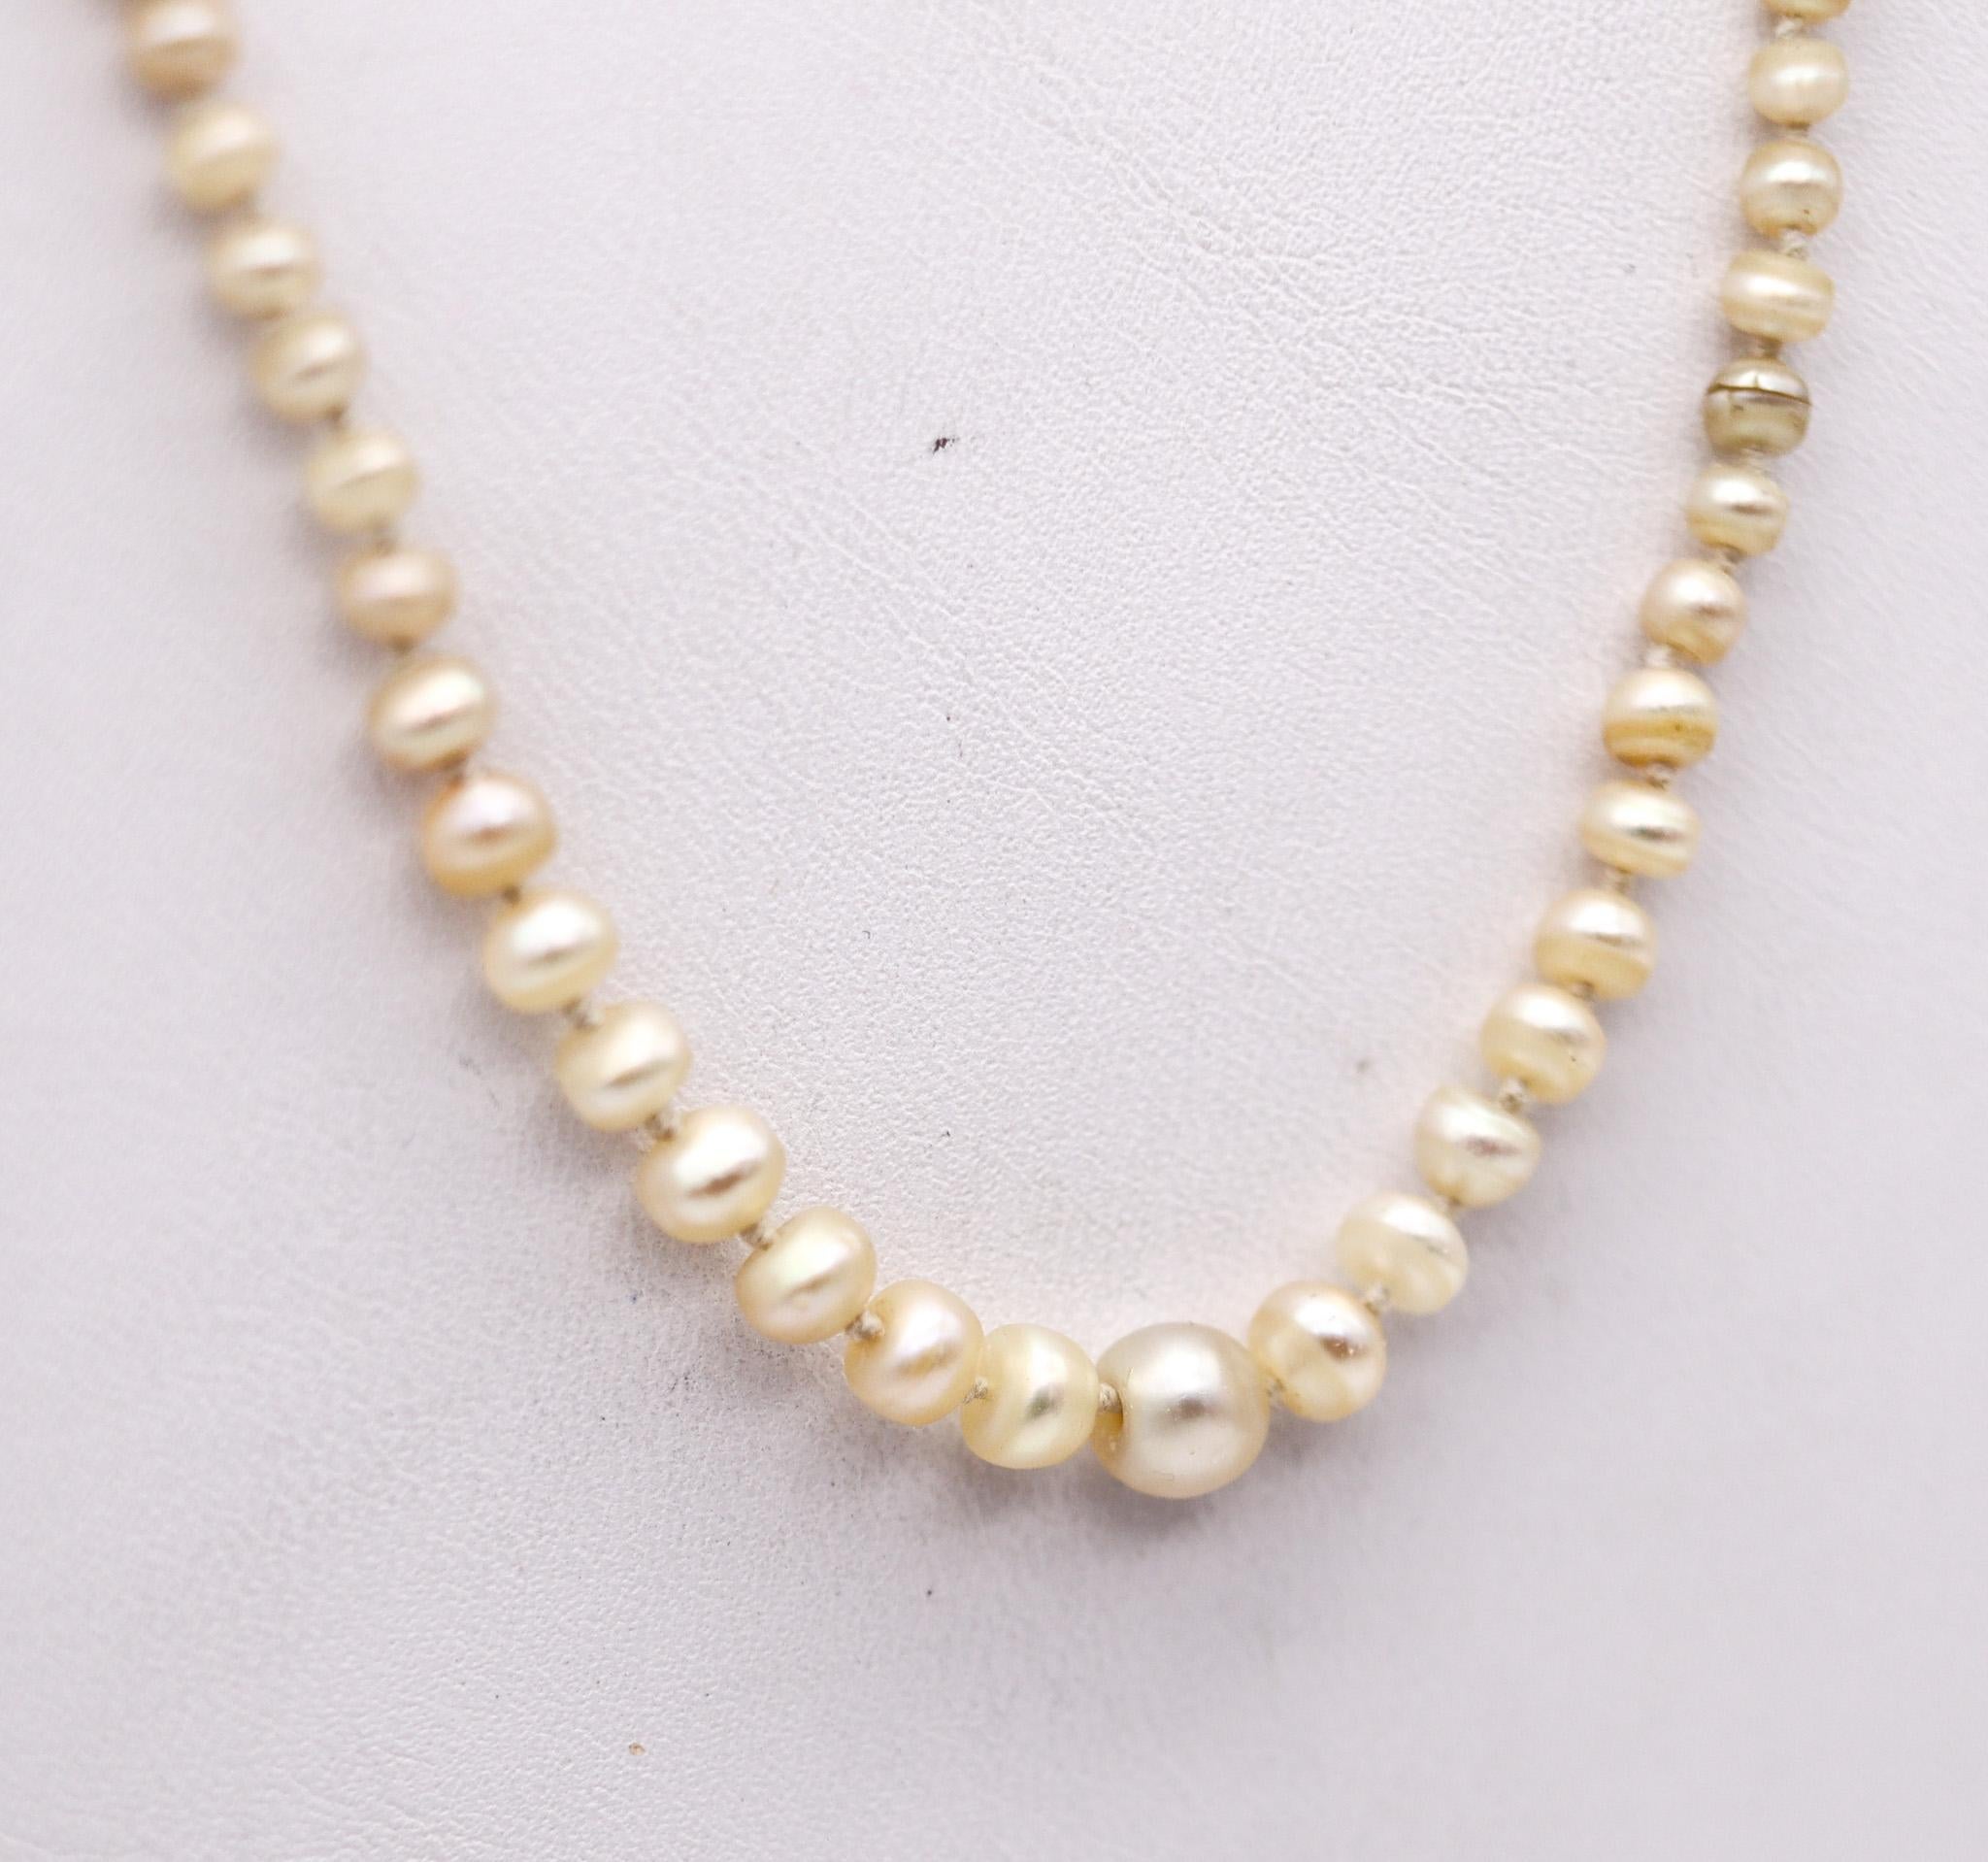 Edwardian belle époque pearls necklace.

Beautiful and very delicate necklace, created in England during the Edwardian belle époque period, back in the 1910. This necklace is made up by a knotted strand of one hundred twenty pearls and a round